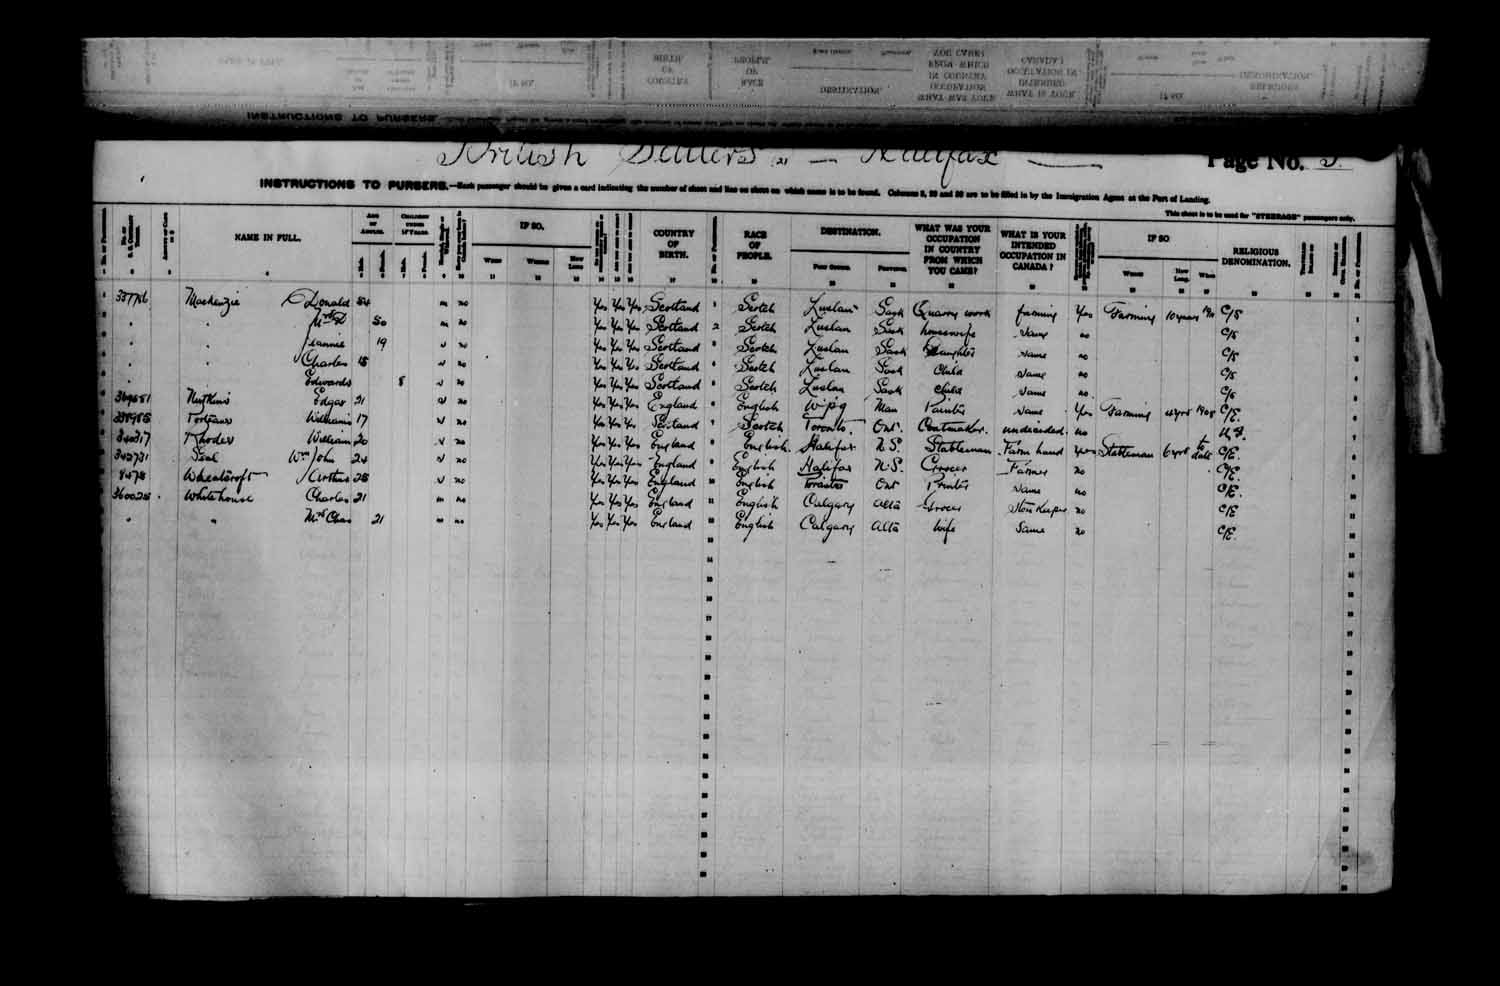 Digitized page of Passenger Lists for Image No.: e003622985